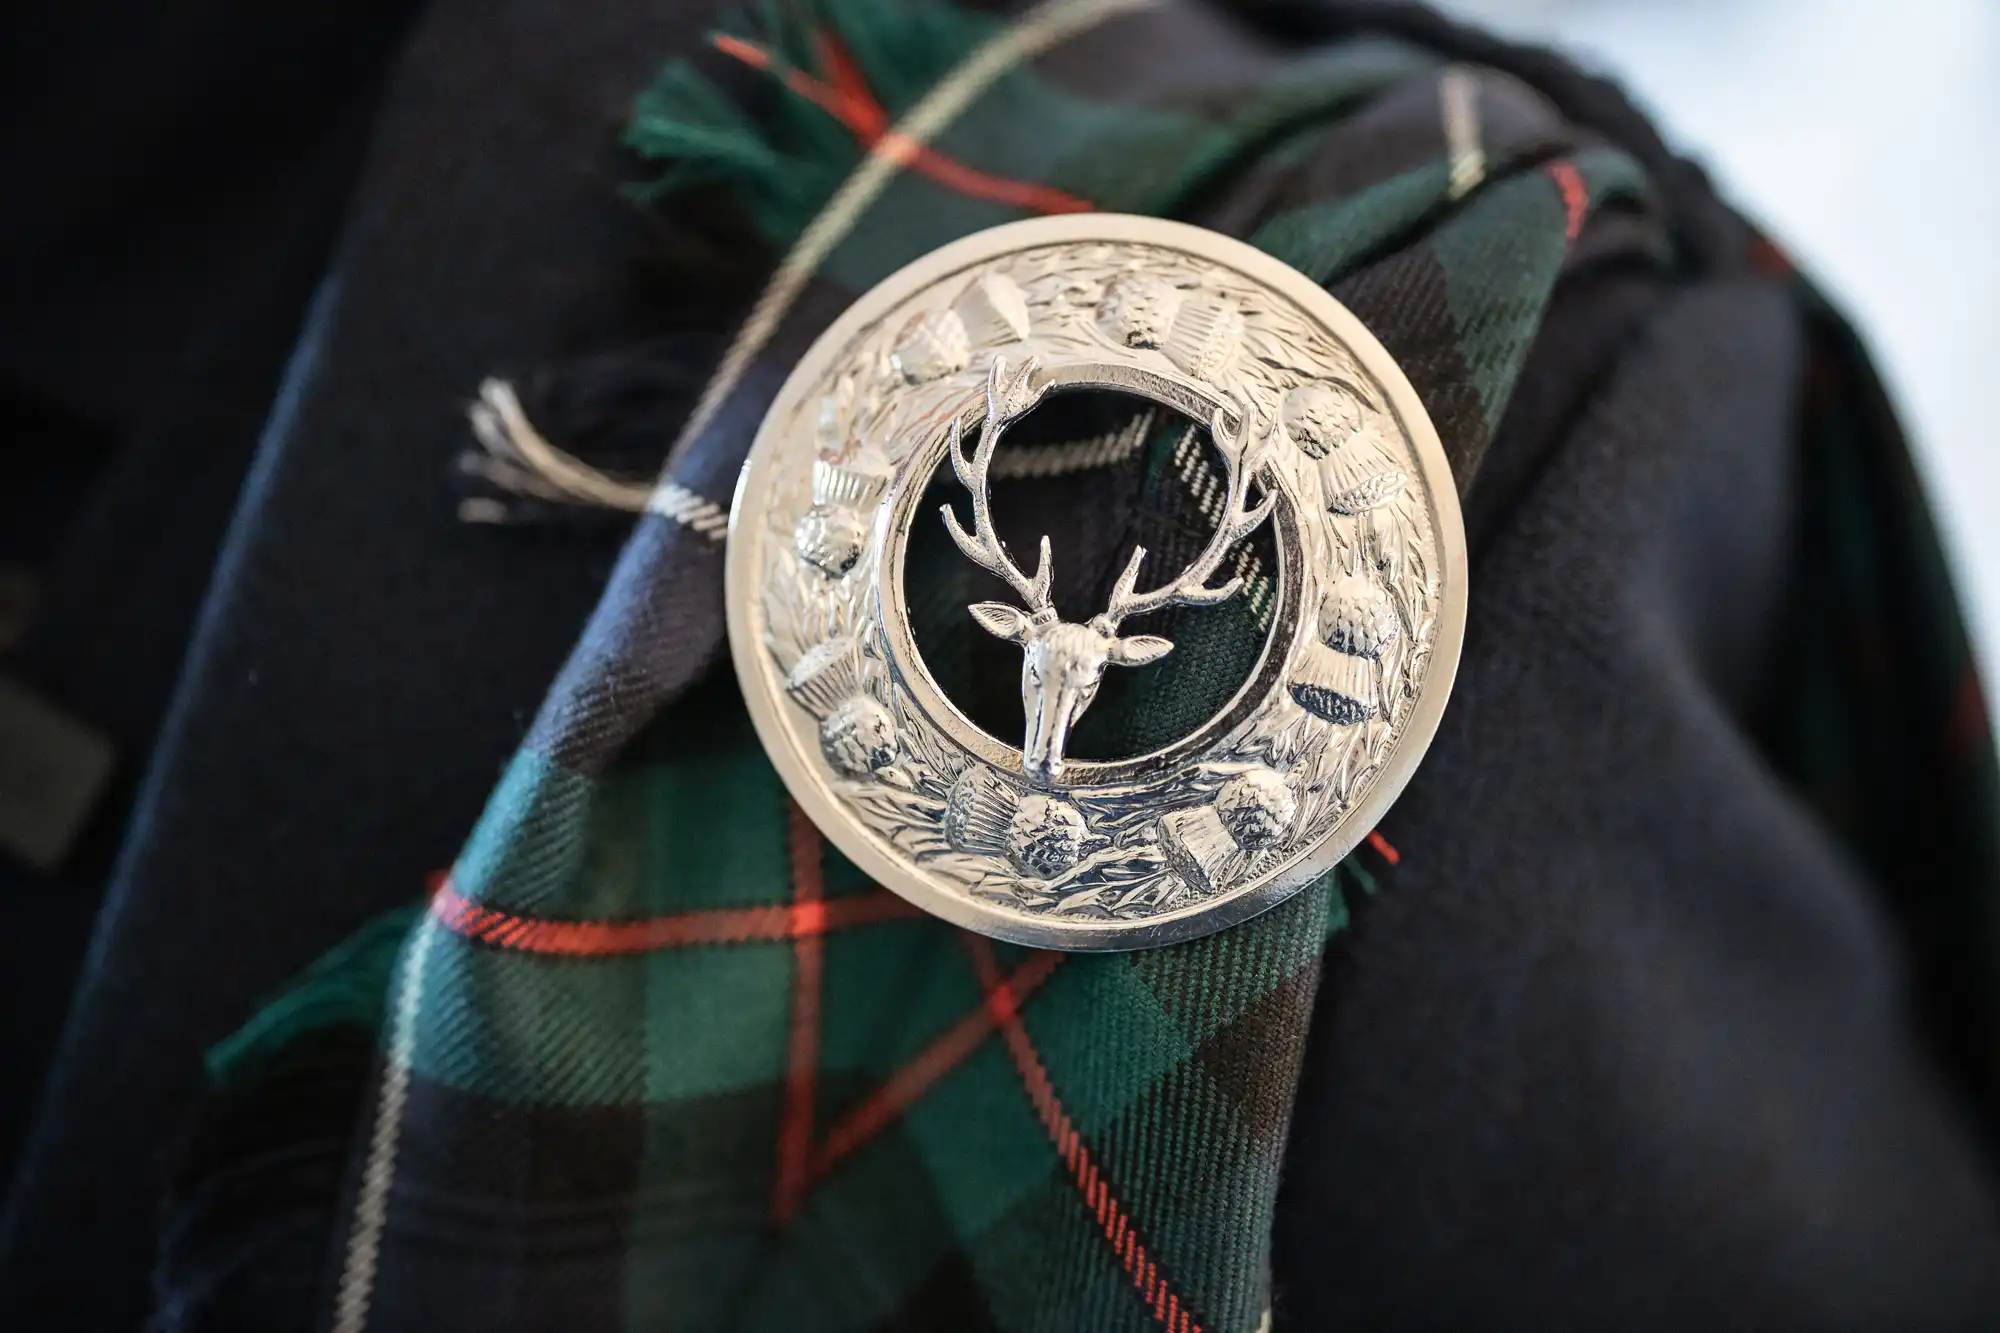 A silver brooch featuring the head of a deer is pinned to a tartan fabric, showcasing a traditional Scottish design.